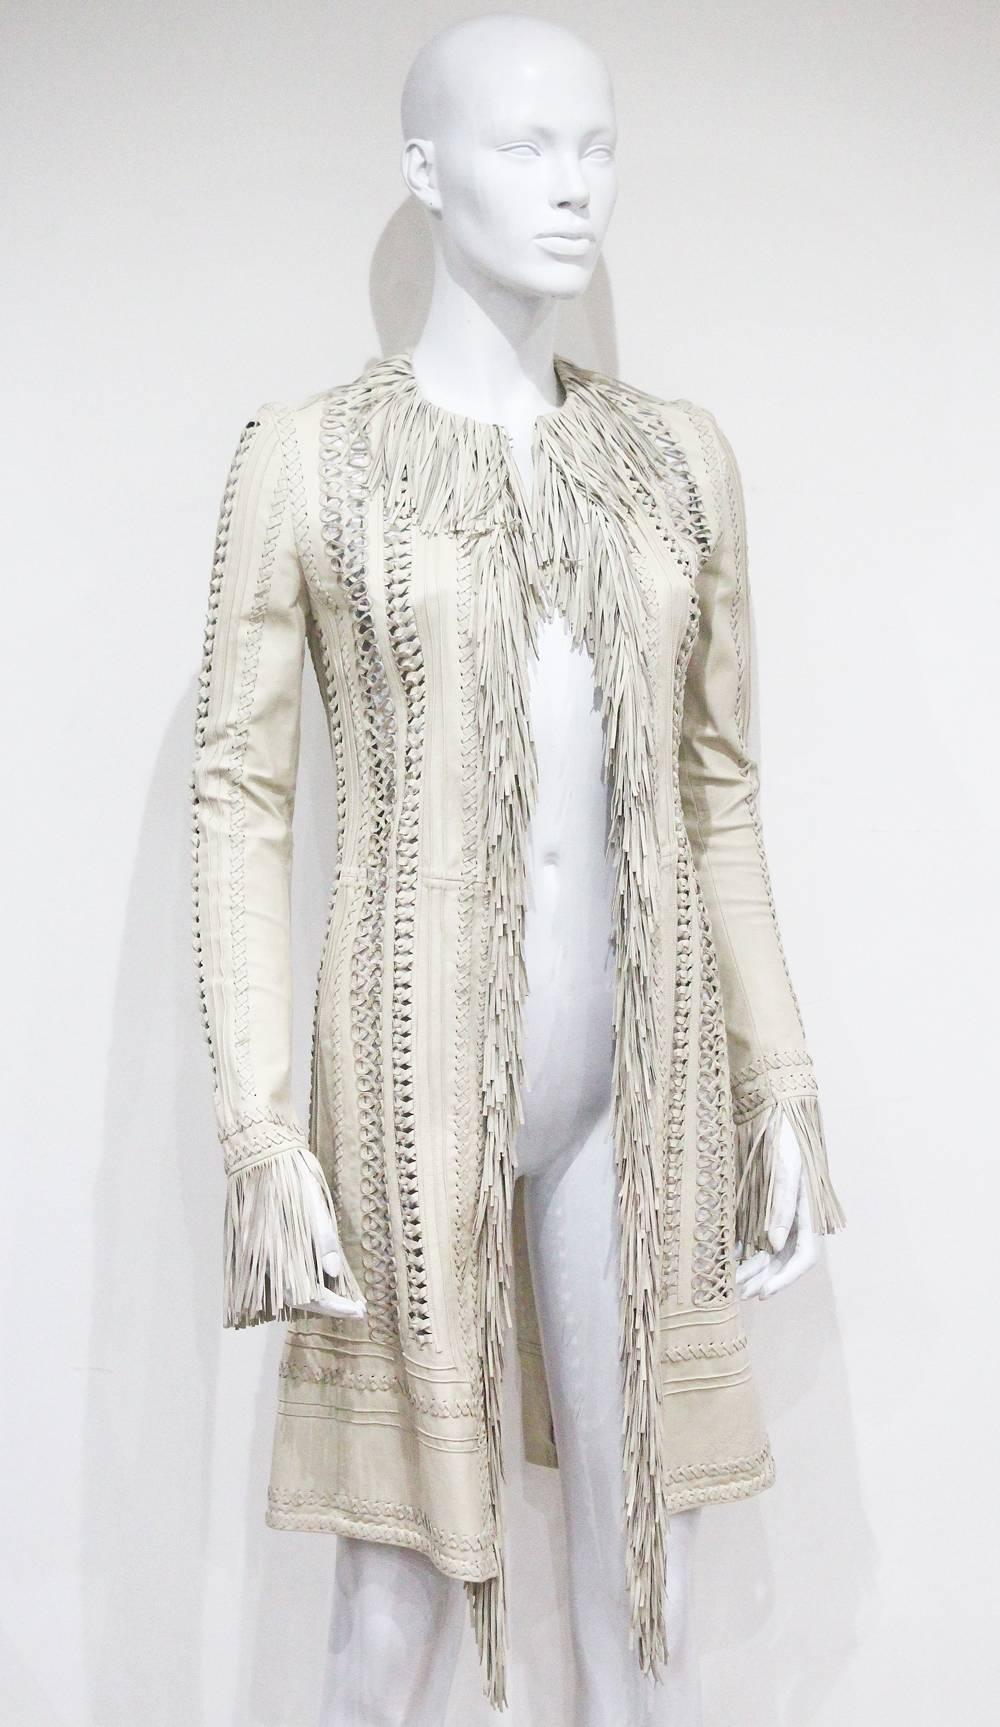 A Gianni Versace leather jacket from the spring/summer 2002 collection, designed by Donatella Versace. The jacket features intricate woven leather, long leather fringing and metal hook and eye closures. 

It 38 - Fr 34 - S  